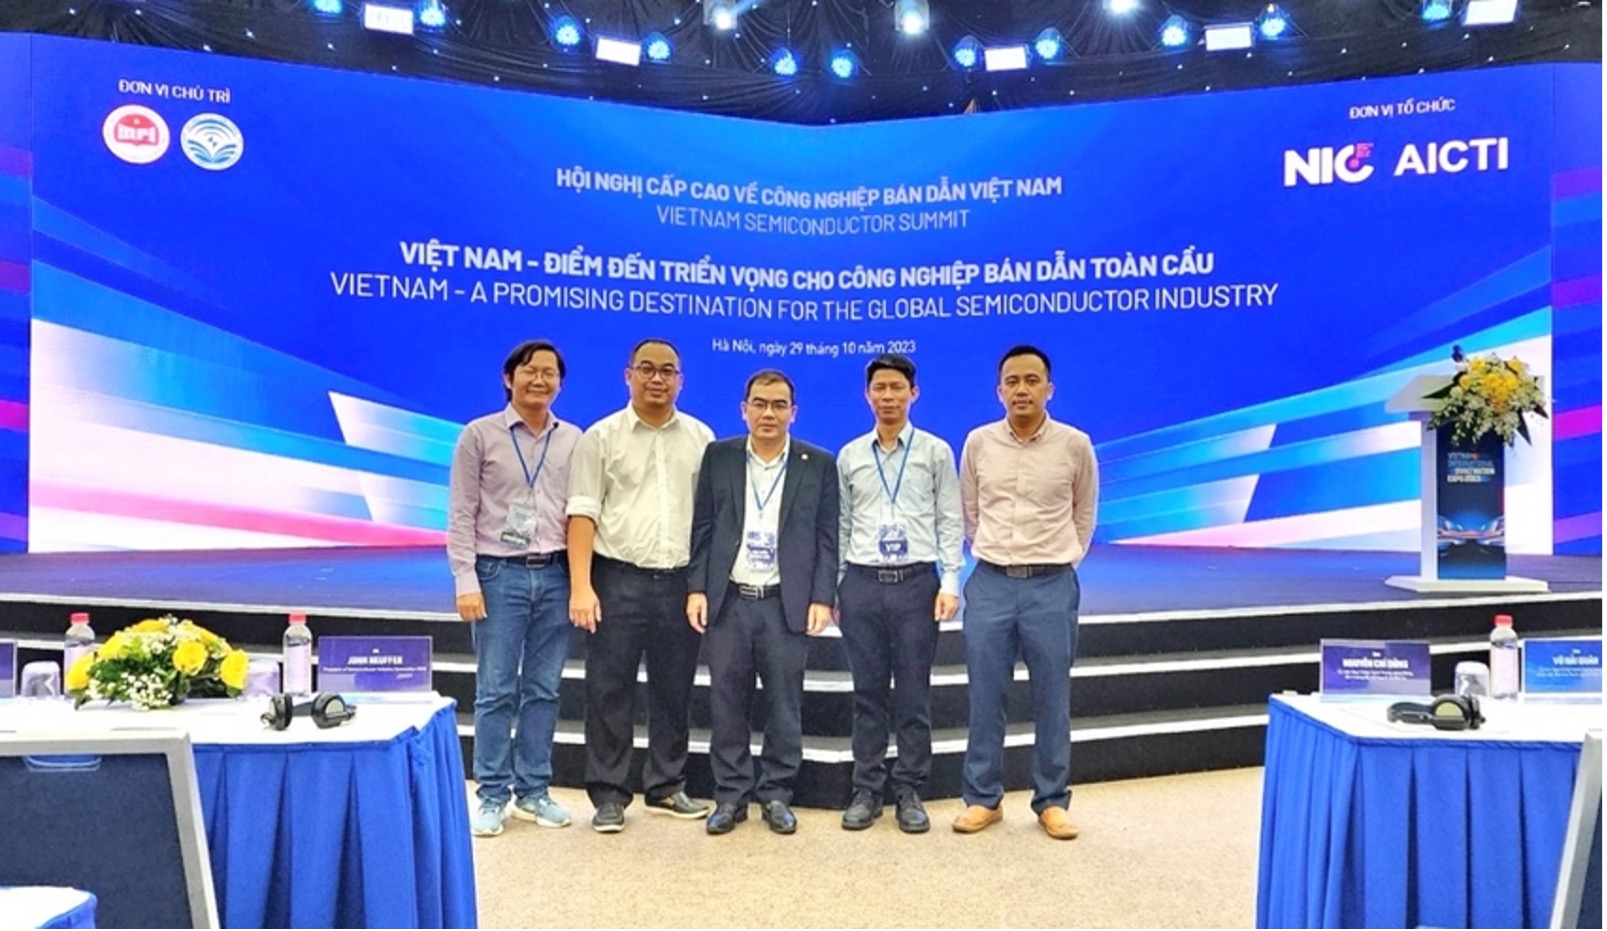 The University of Danang - University attended the Vietnam Semiconductor Industry Summit at NIC Hoa Lac